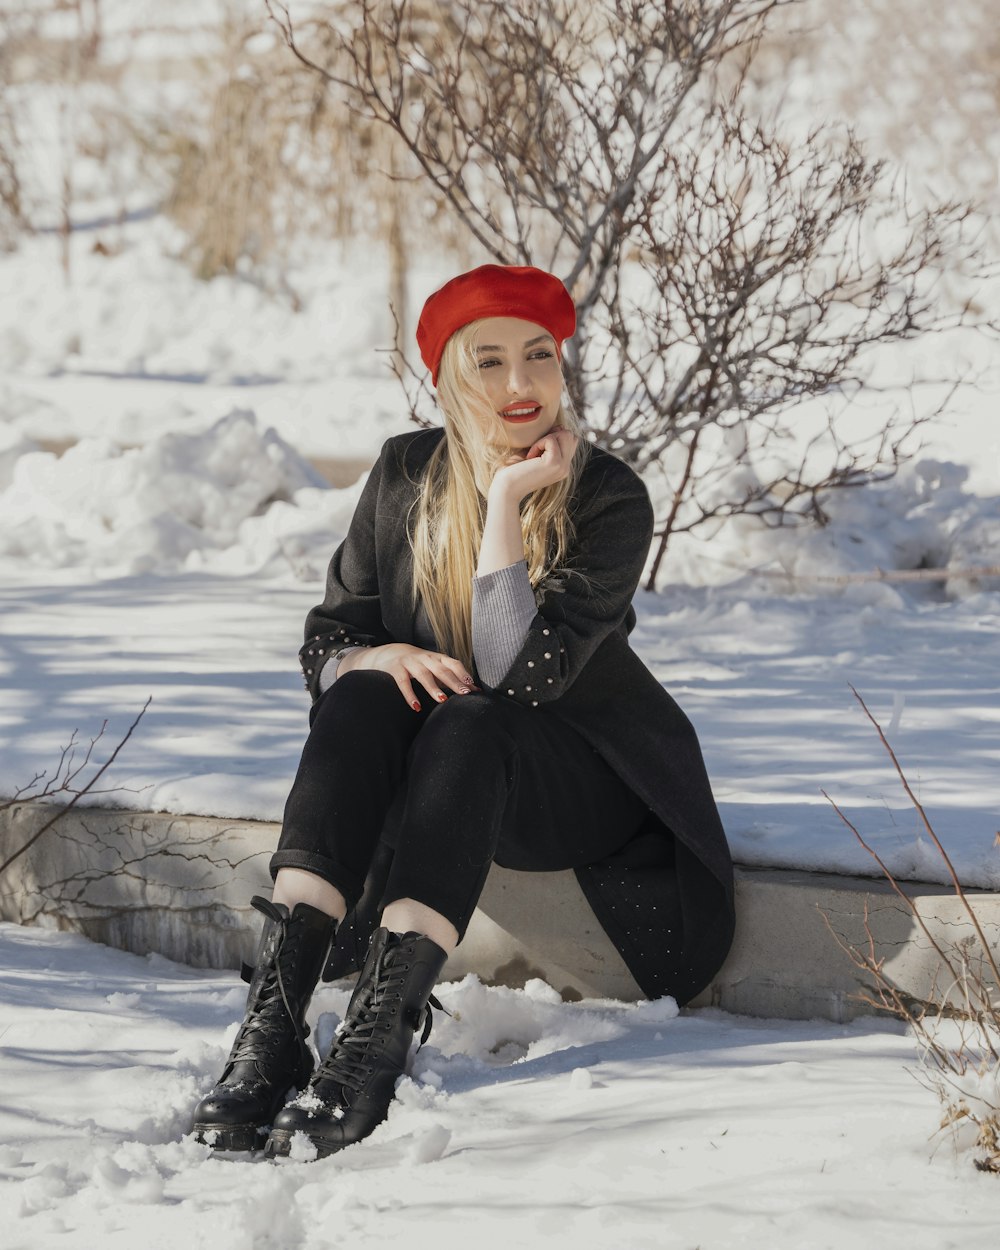 a woman sitting in the snow wearing a red hat